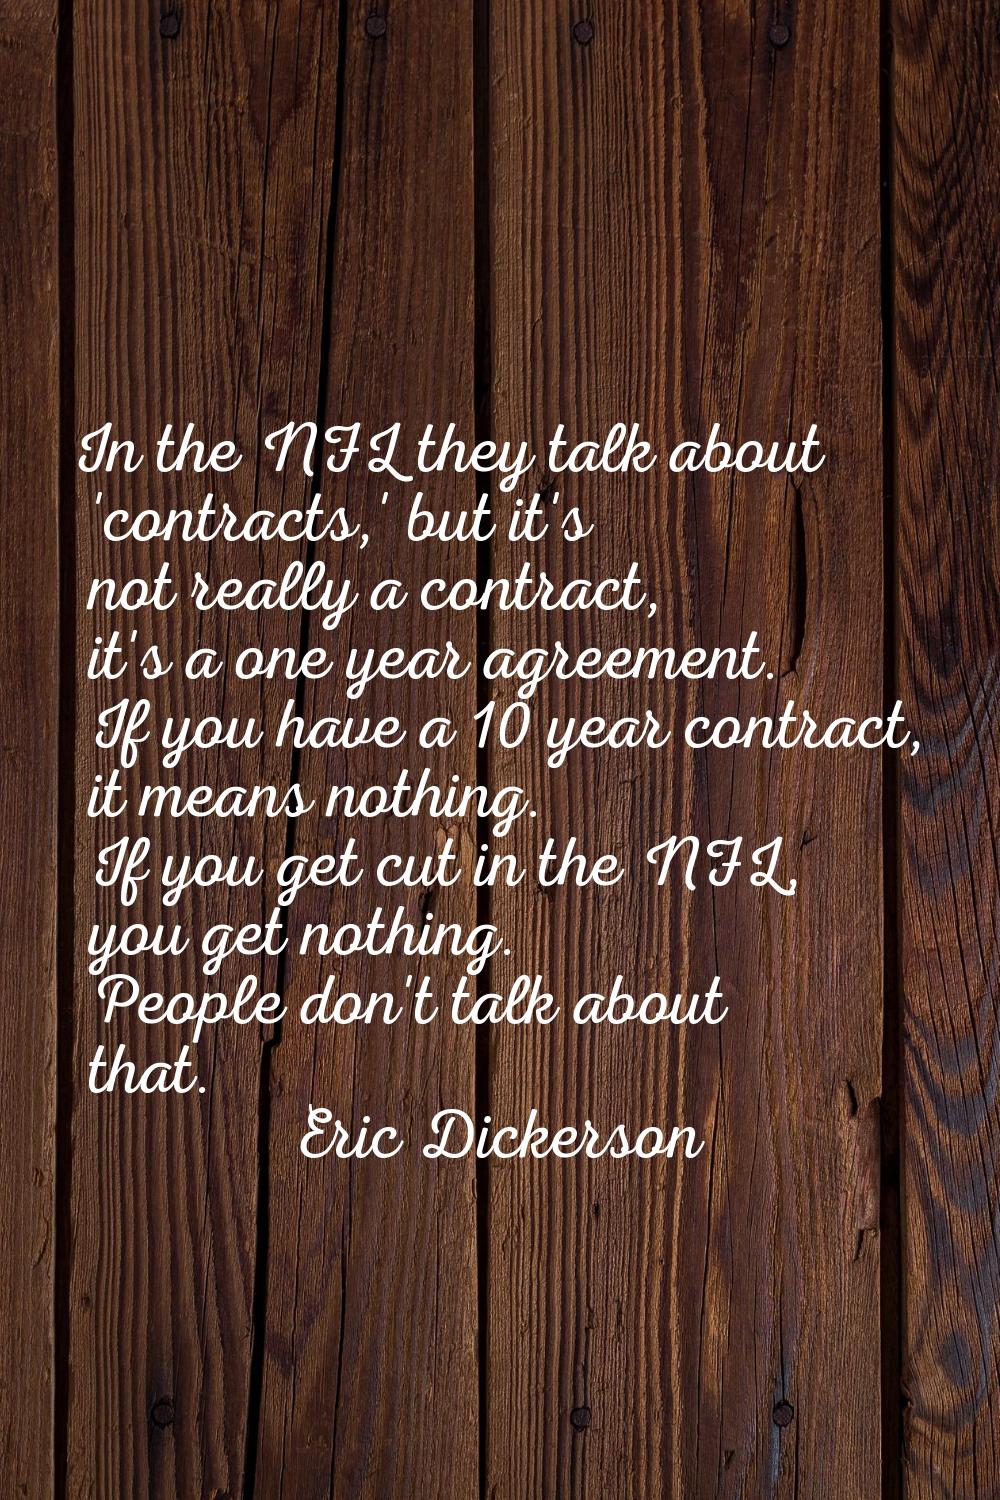 In the NFL they talk about 'contracts,' but it's not really a contract, it's a one year agreement. 